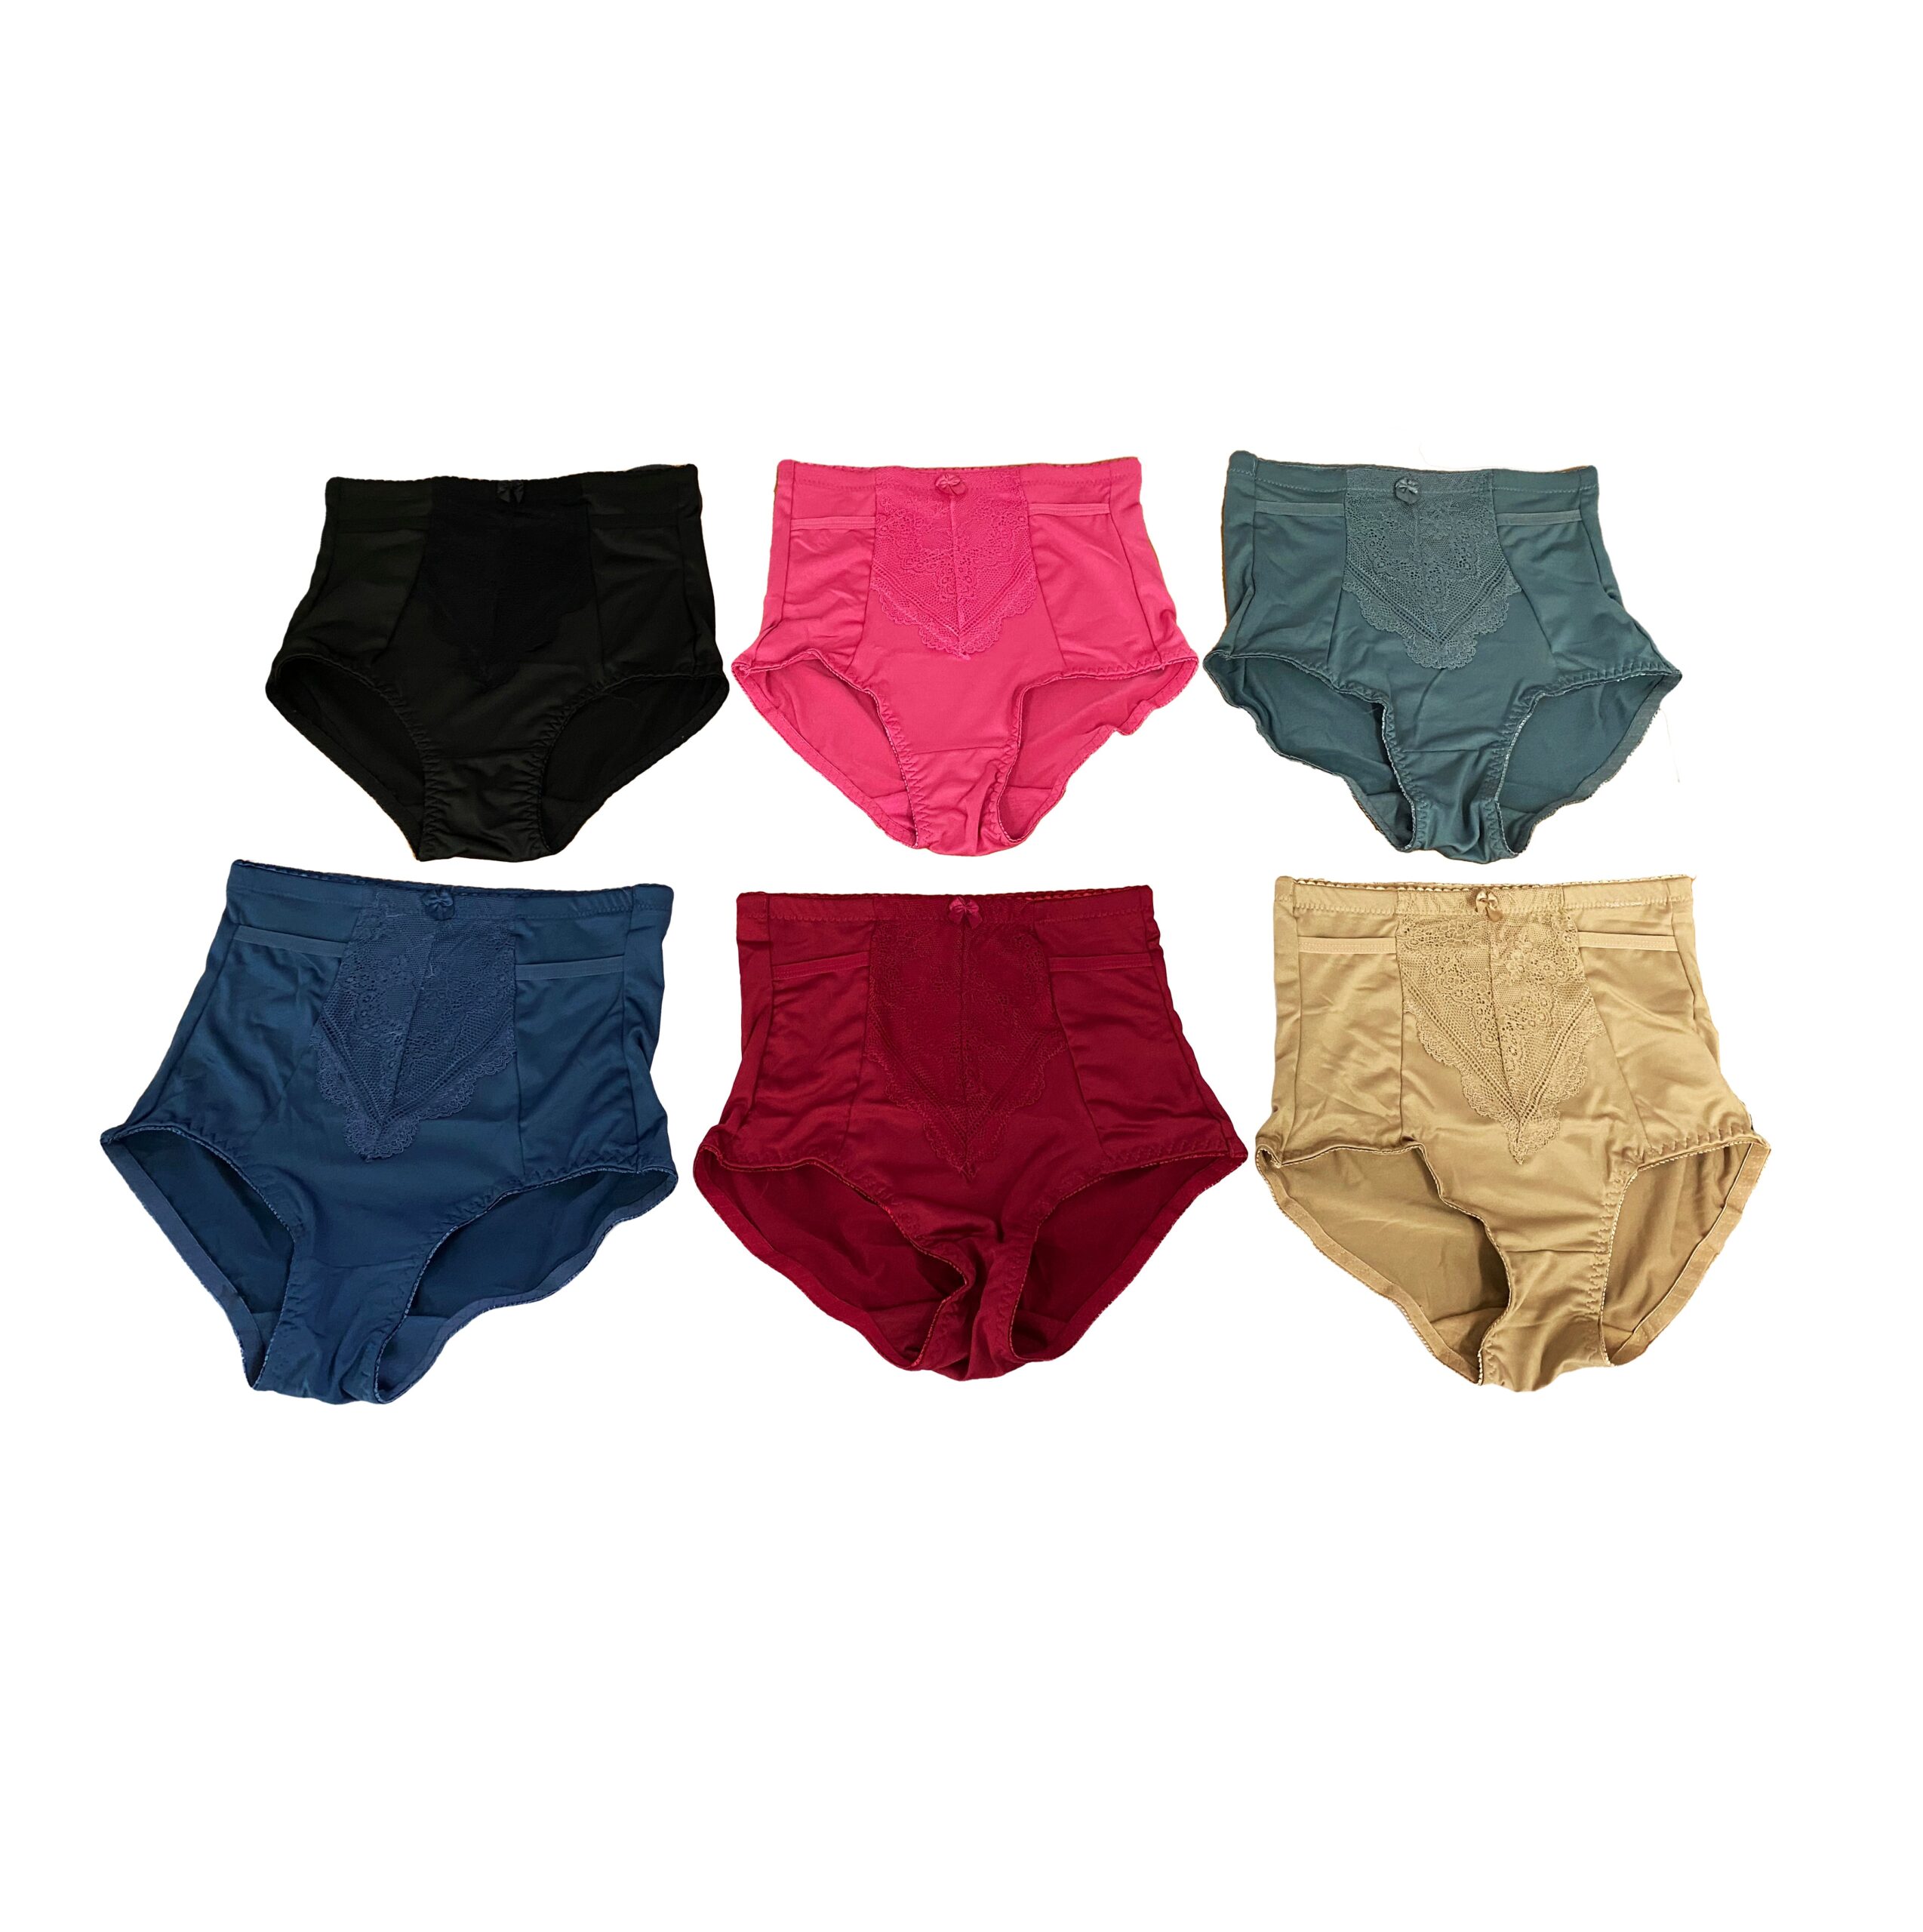 Only 3.99 usd for Dulce Donna, Panties Faja de Mujer Online at the